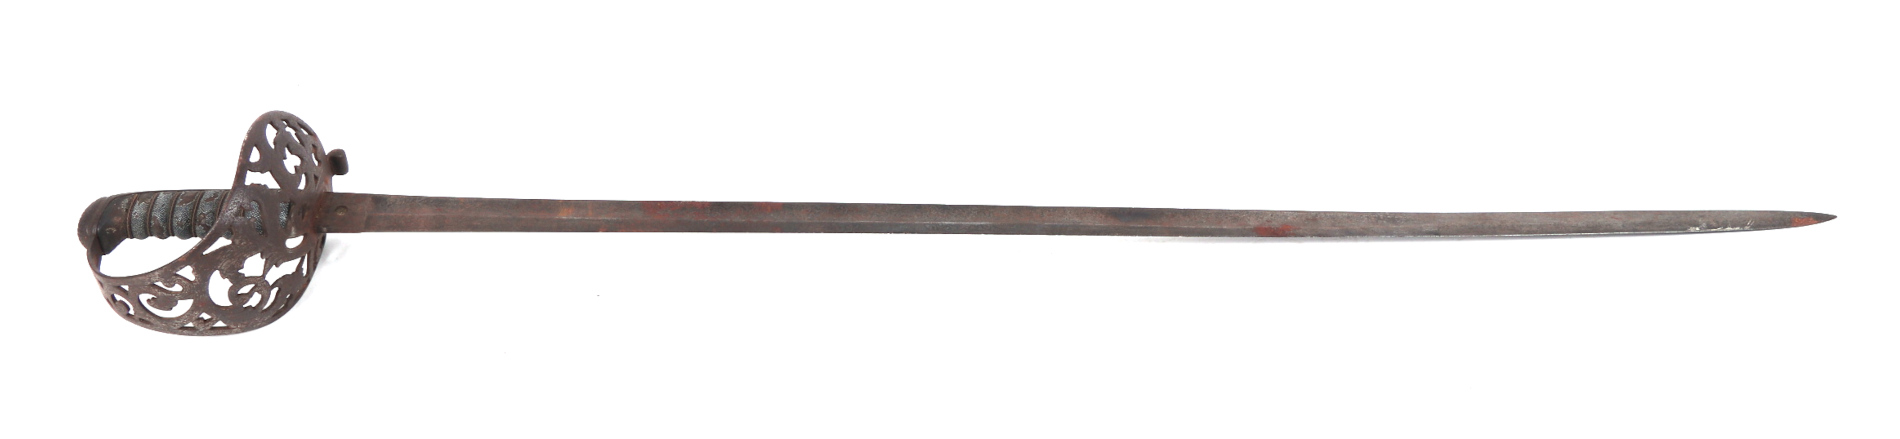 A British Officer's sword with wirebound shagreen grip, pieced and engraved basket hilt and 89cms